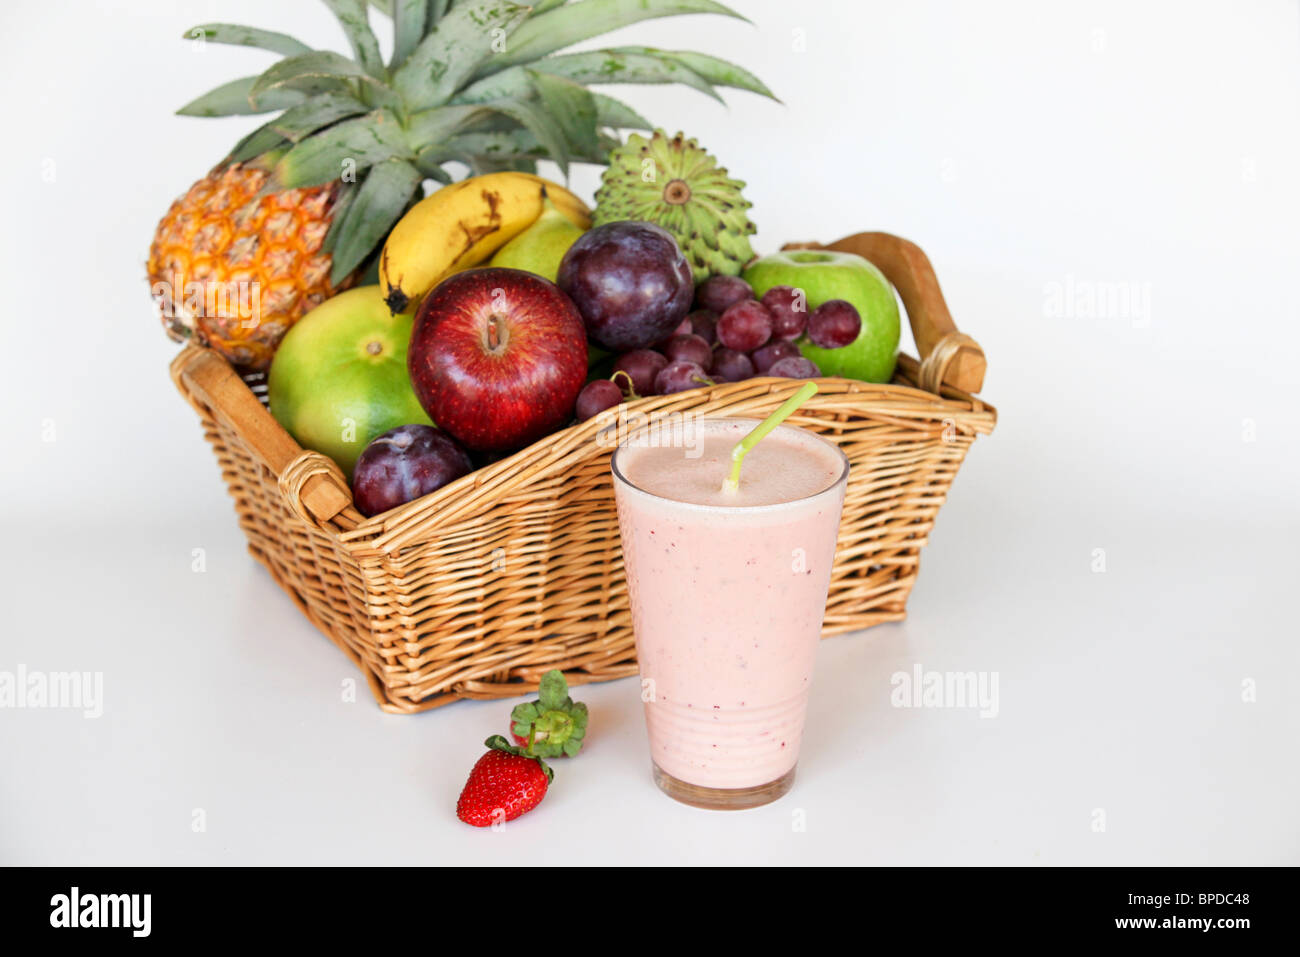 Fruit Health drink with a basket of fresh fruit on white background Stock Photo